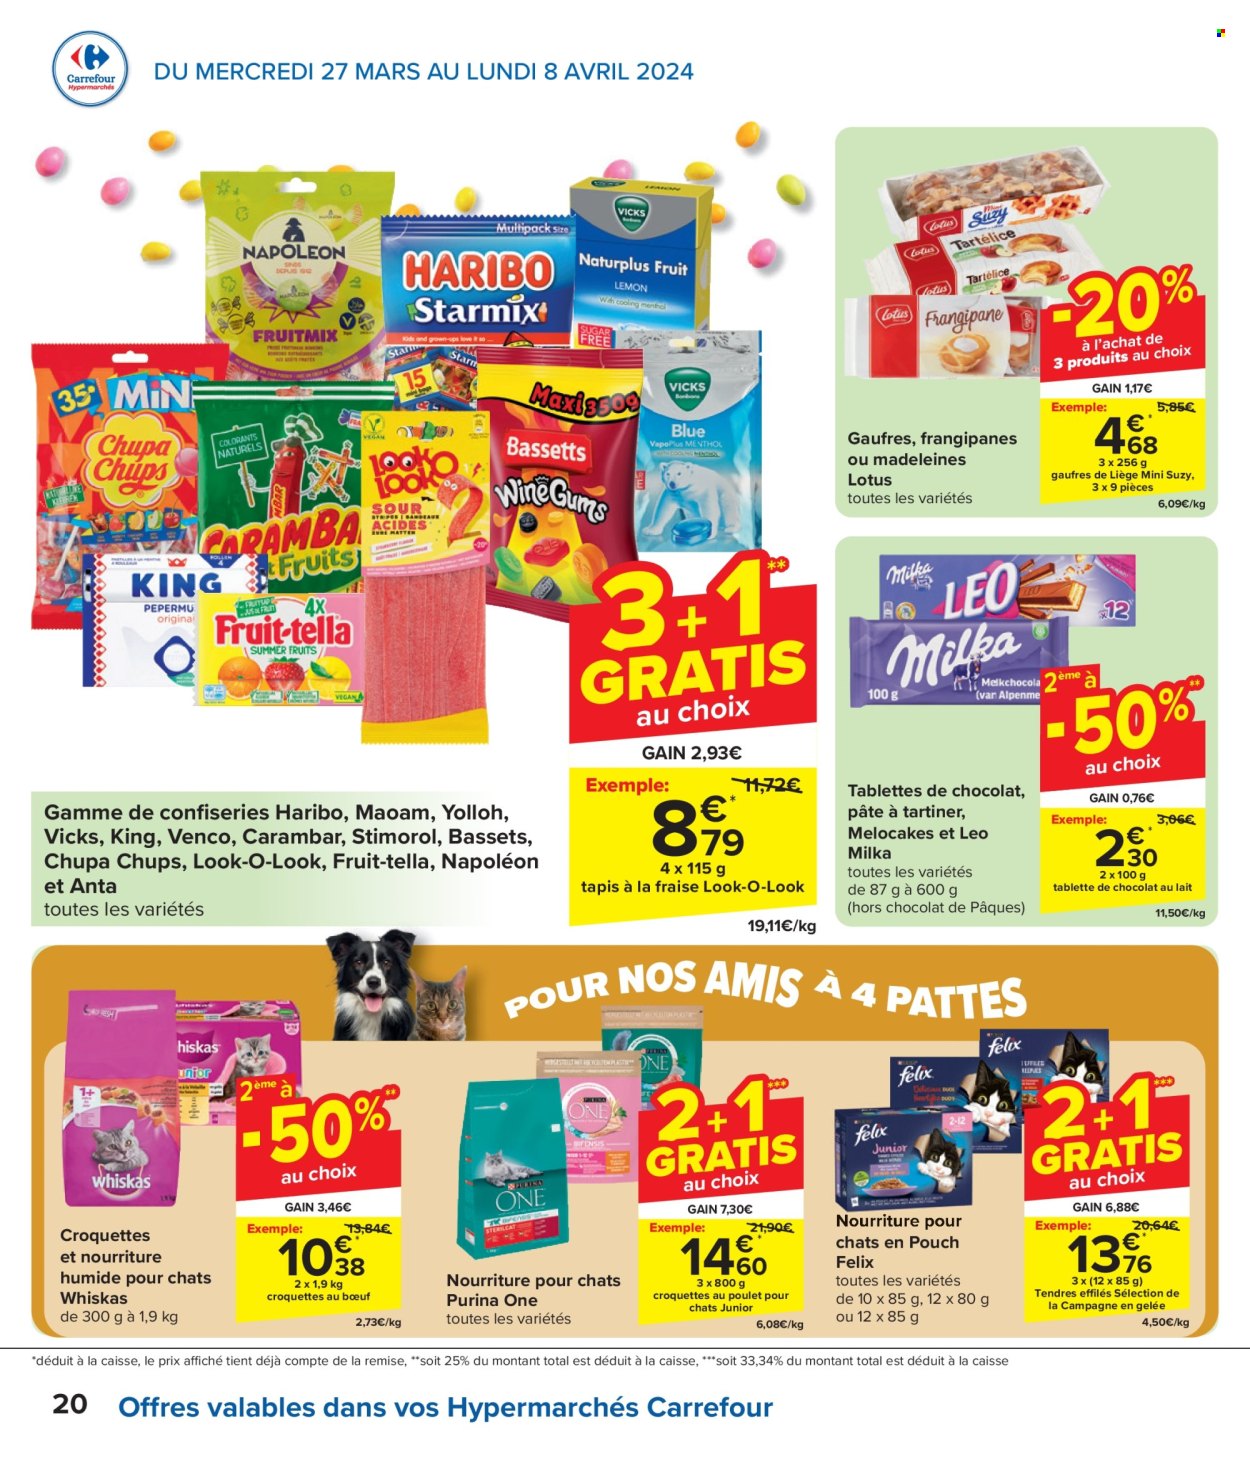 Catalogue Carrefour hypermarkt - 27.3.2024 - 8.4.2024. Page 20.